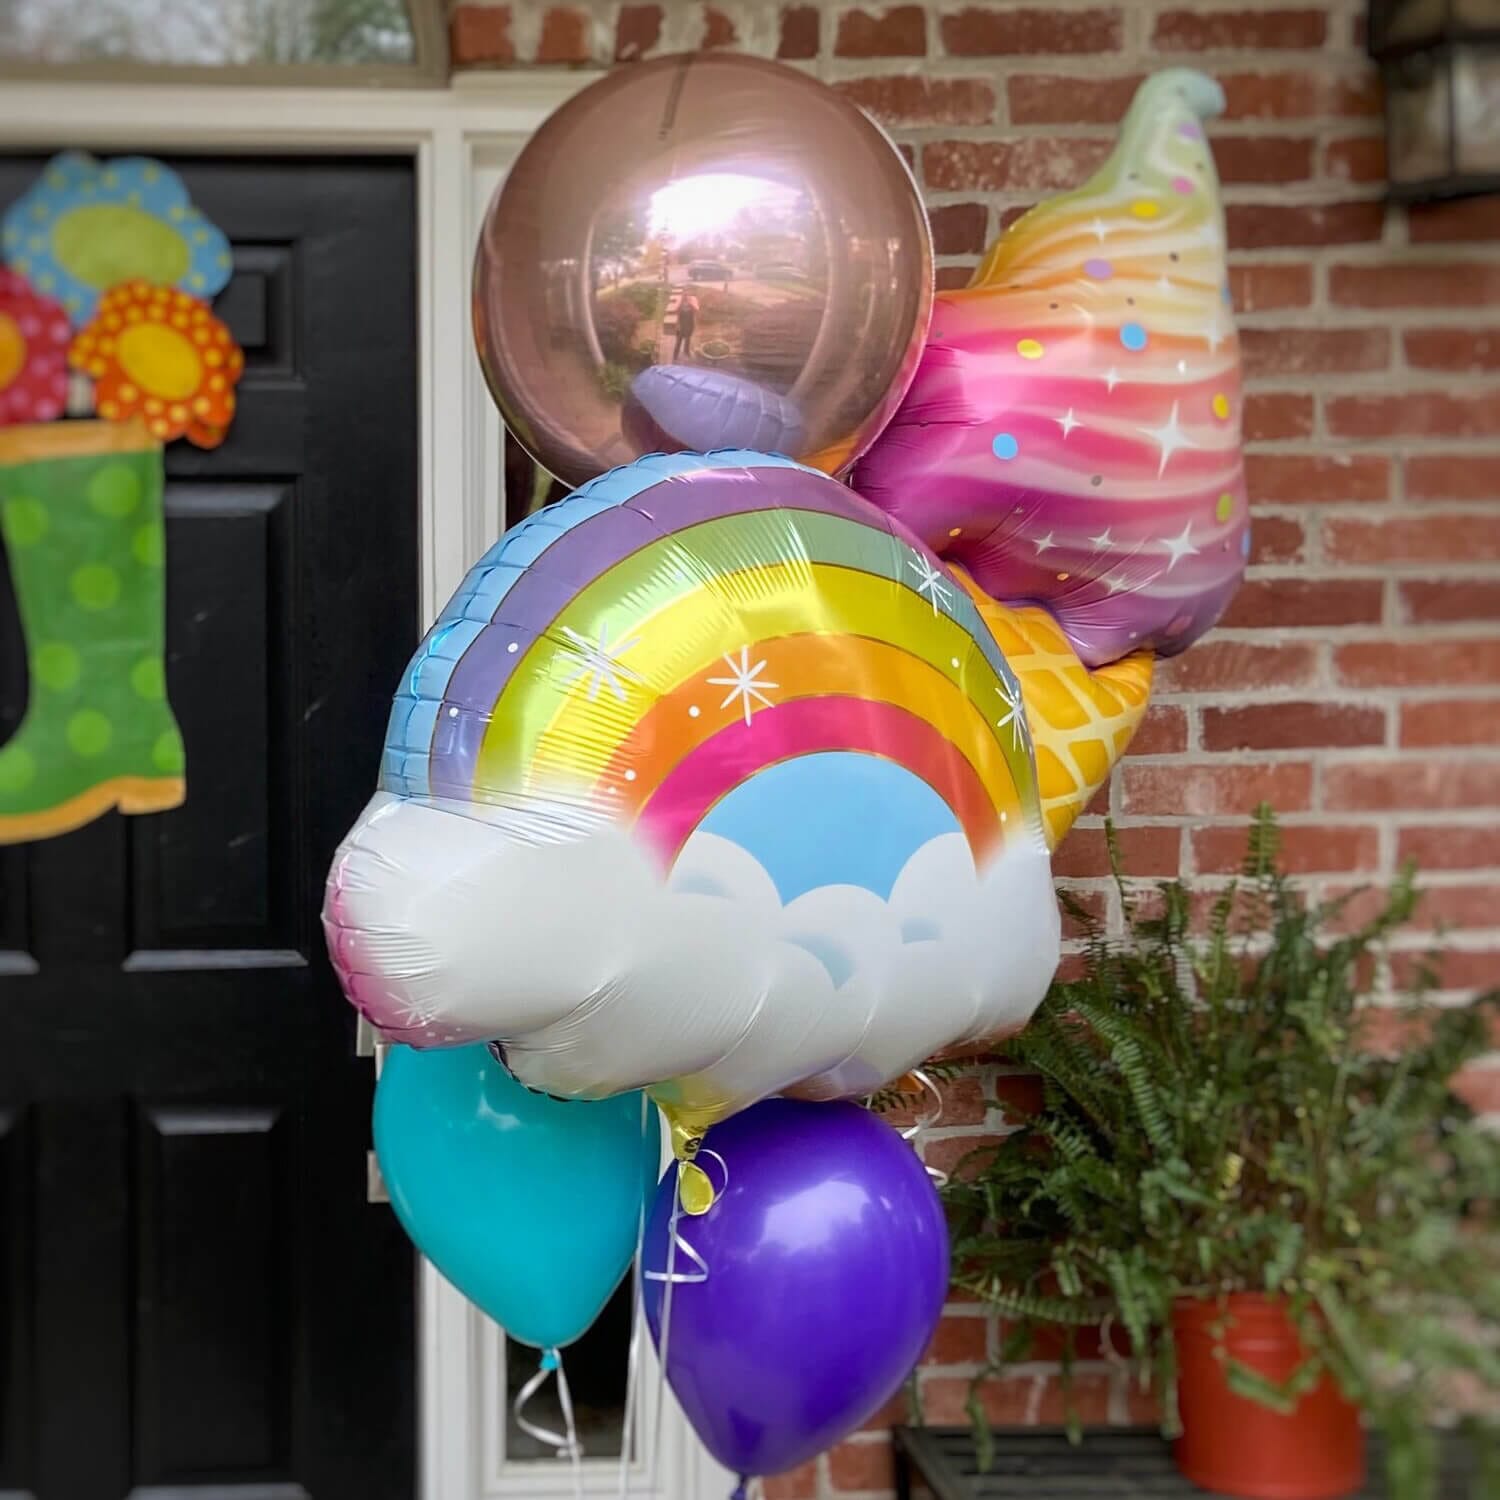 Oversized helium bouquet with ice cream cone, rainbow and shiny orb helium balloons from Just Peachy in Little Rock, Arkansas.